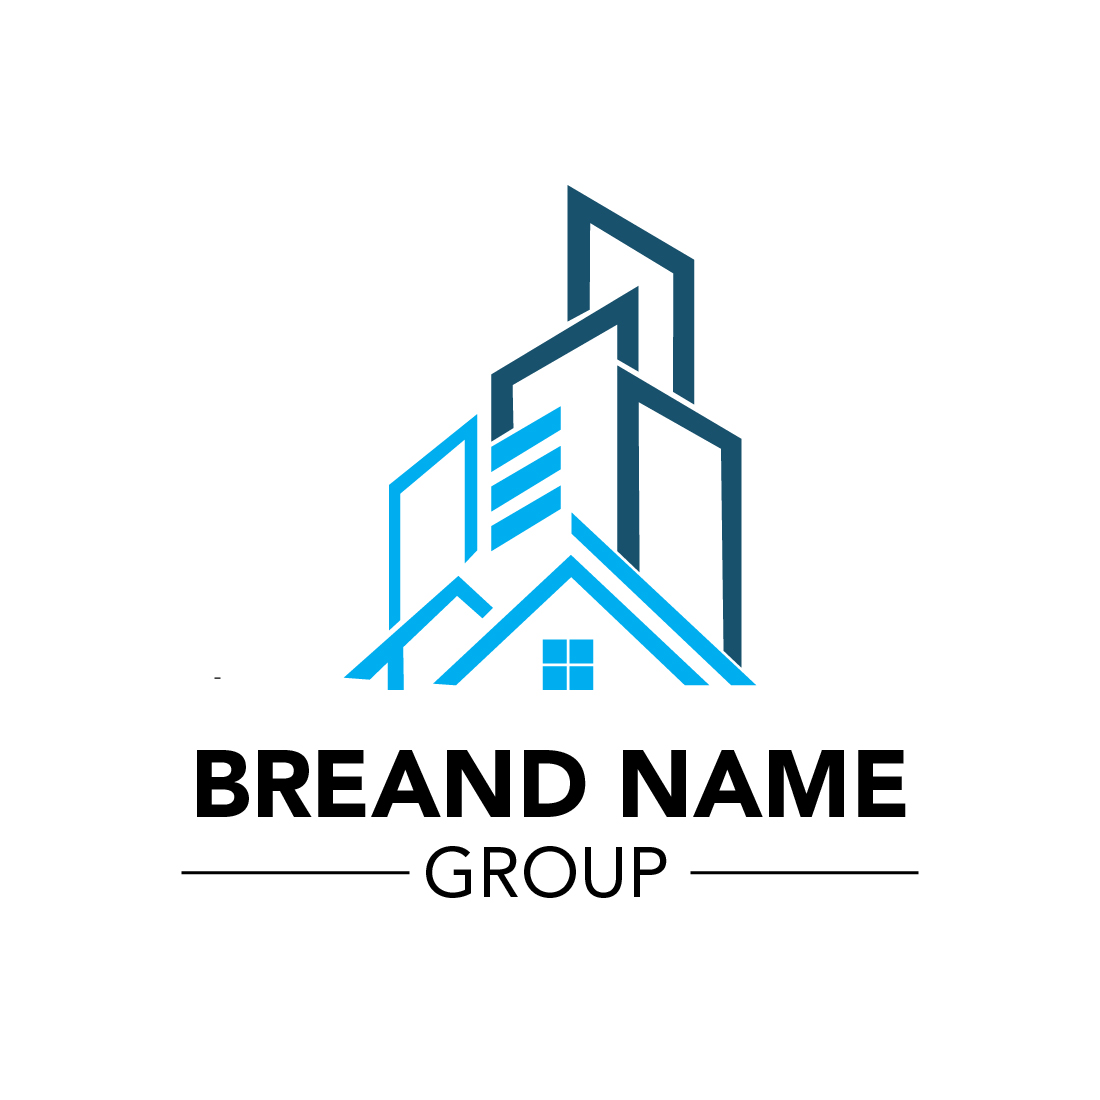 Logo for a real estate group.